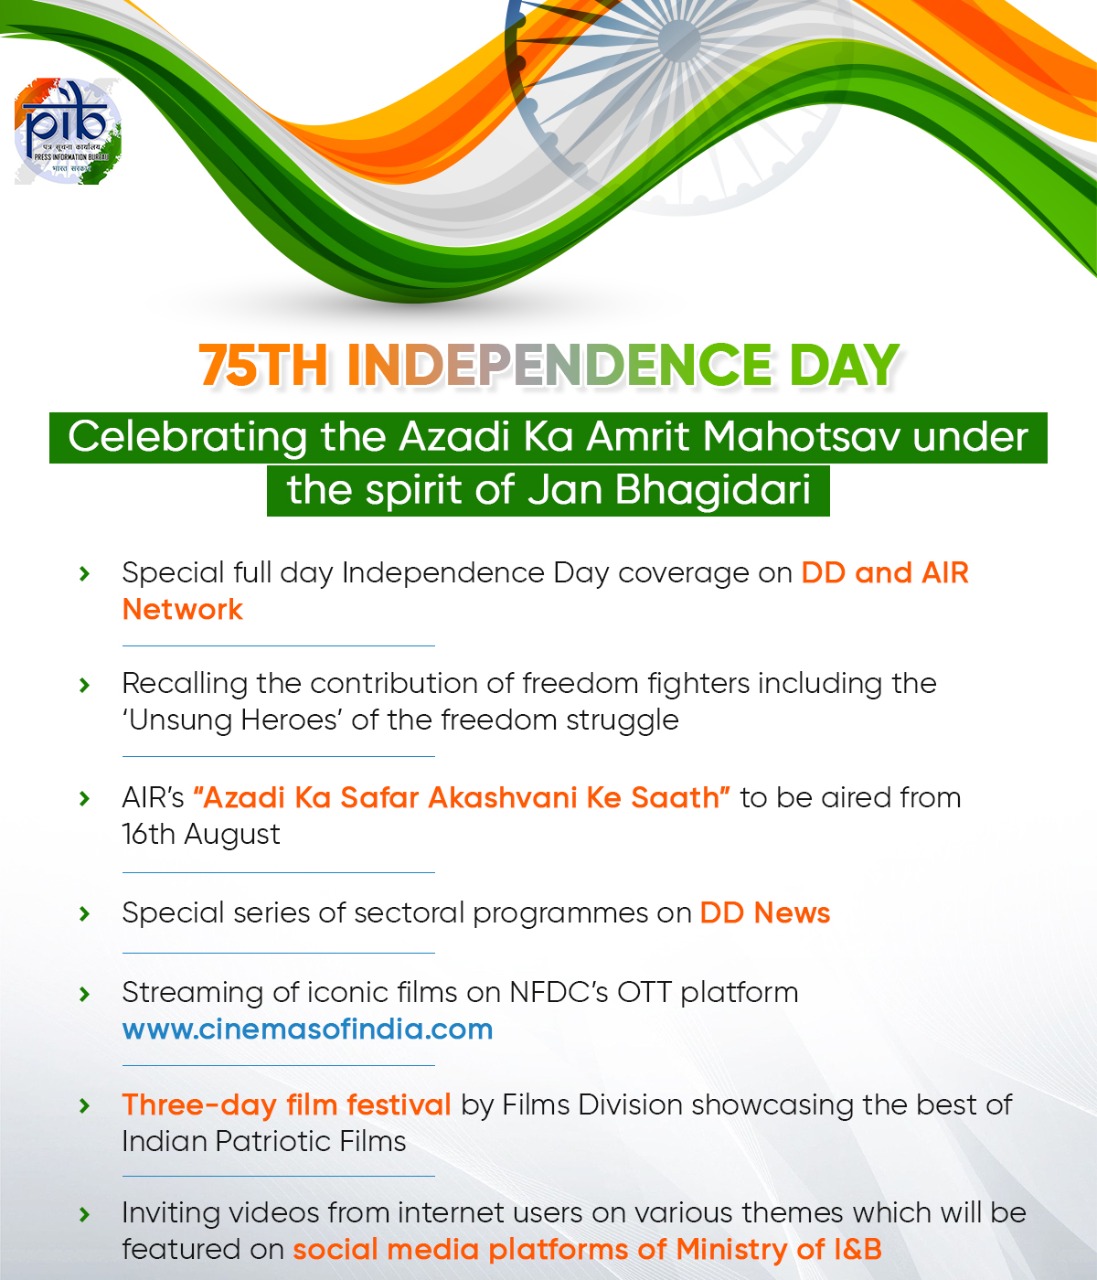 Celebrations Of Azadi Ka Amrit Mahotsav Under The Spirit Of Jan Bhagidari Special Full Day Independence Day Coverage On Dd And Air Network Air S Azadi Ka Safar Akashvani Ke Saath To Be Aired From 16th August Special Sectoral Programmes On Dd